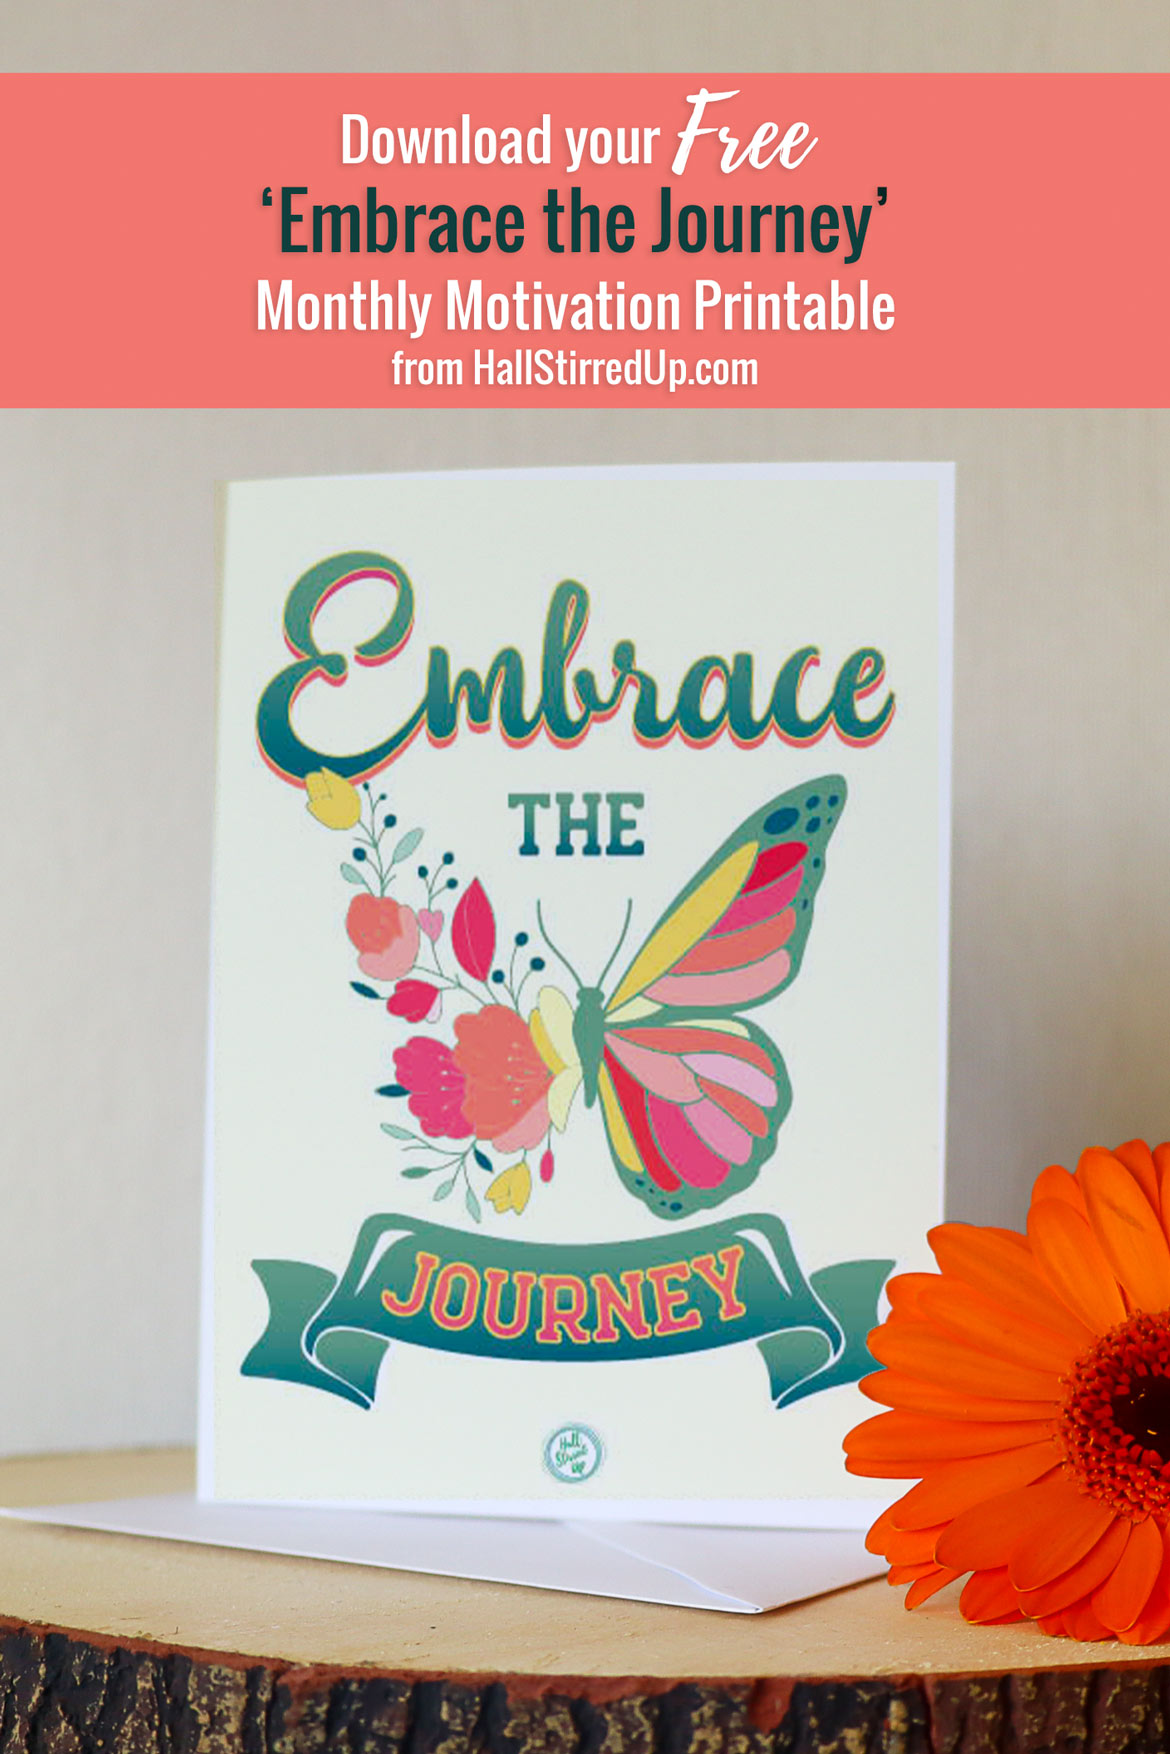 Embrace the Journey Monthly Motivation includes printable